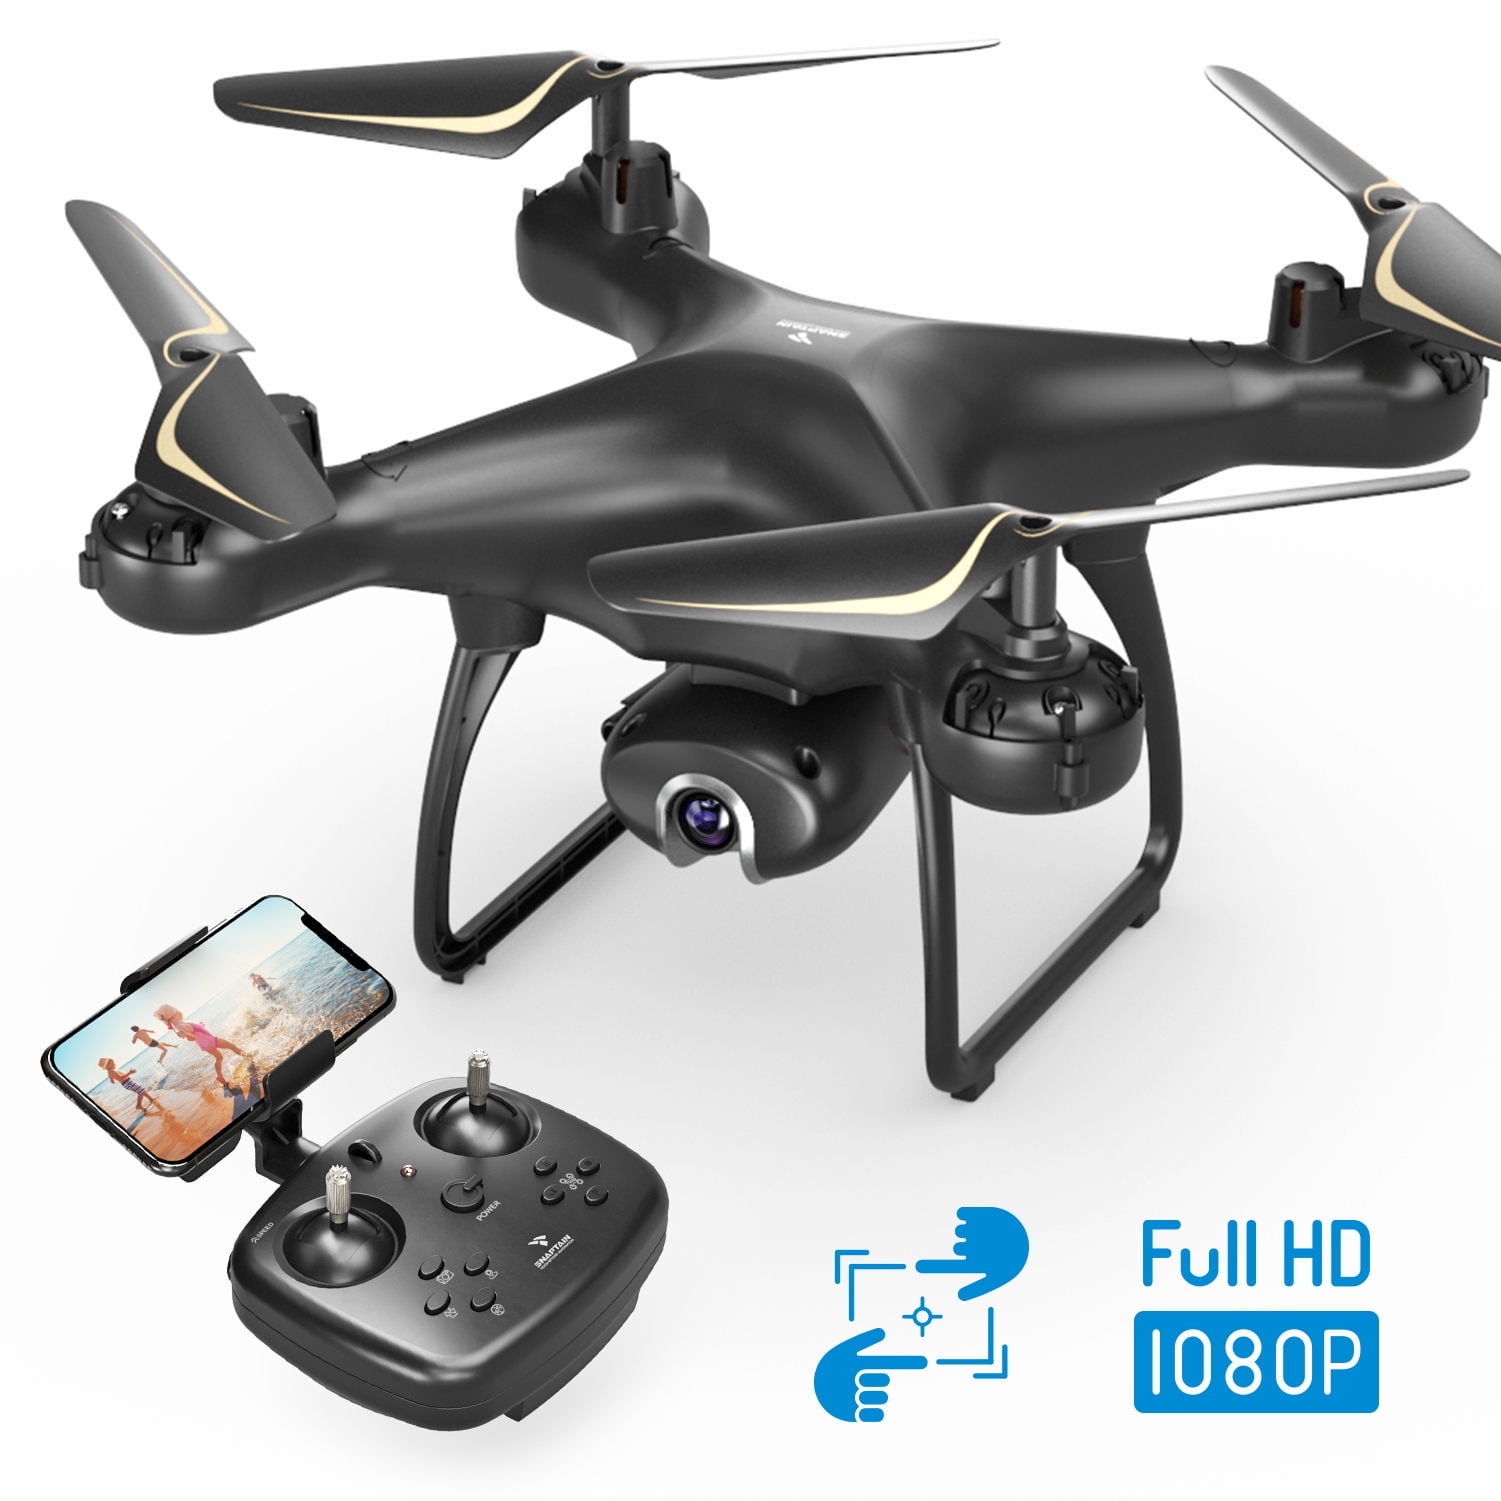 WHWYY FPV Drone with Camera for Adults 1080p HD Live Video 25mins Long Flight Time Foldable RC Drone with Altitude Hold 3D Flip APP Control 2 Batteries RC Toy Quadcopter for Kids Beginners 